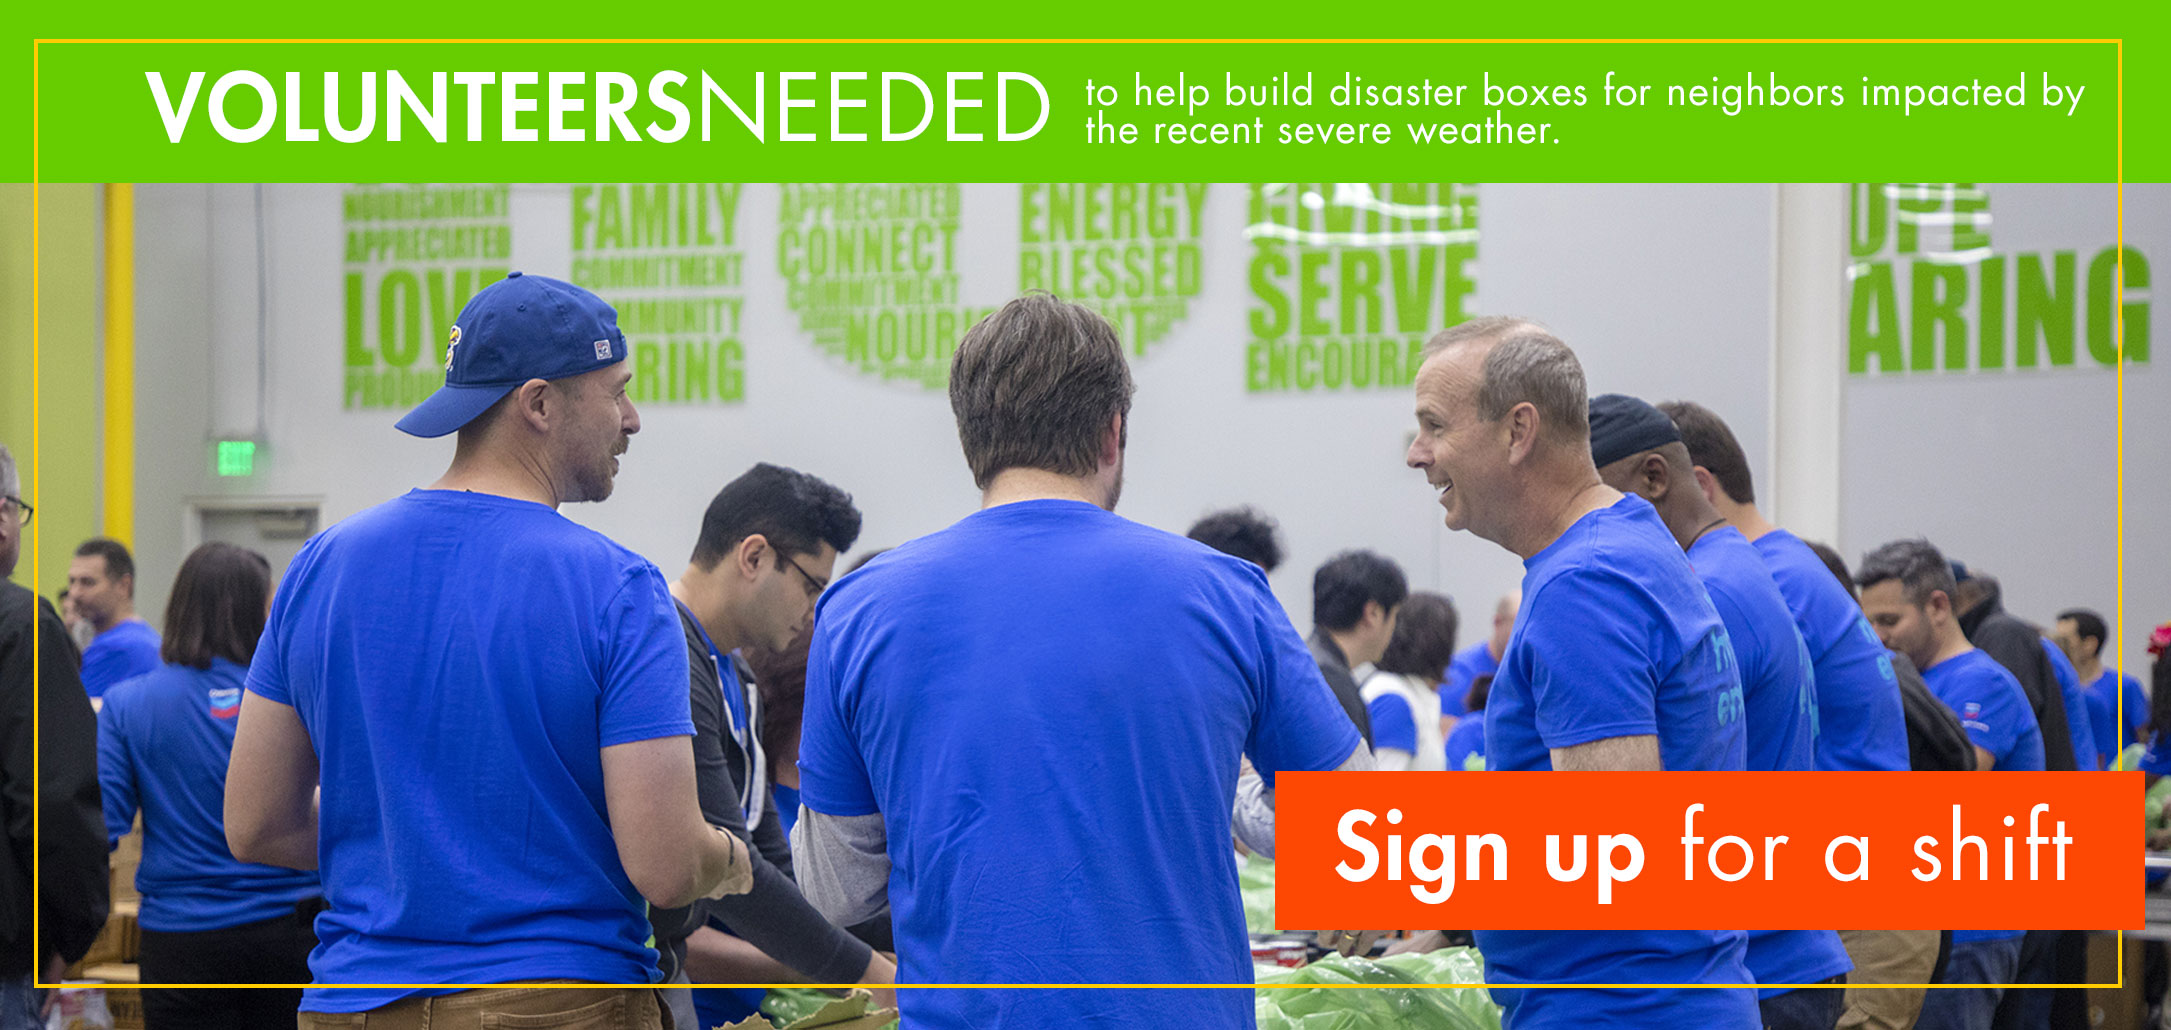 Volunteers needed to help build disaster boxes for neighbors impacted by the recent severe weather.